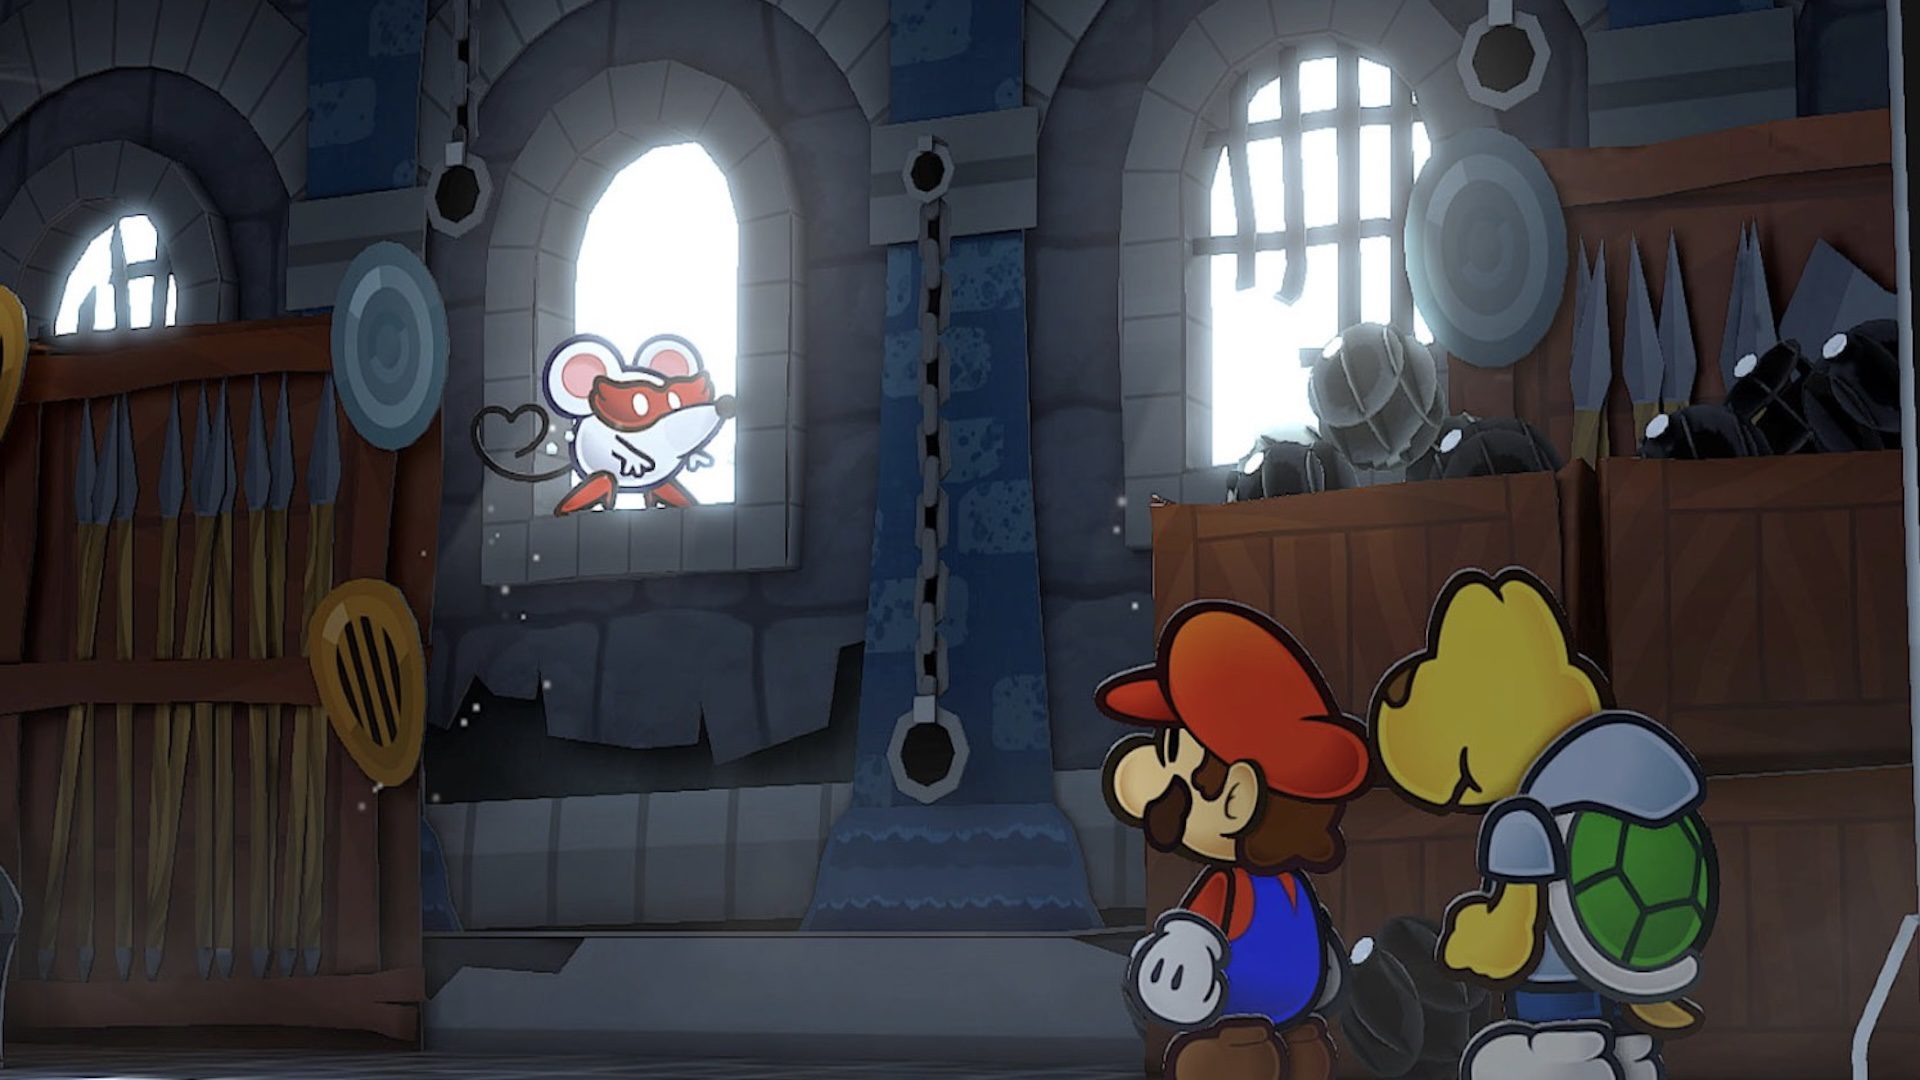 Nintendo Switch 2 speculation heats up again as 4K support spotted in Paper Mario: Code of the Thousand-Year Door